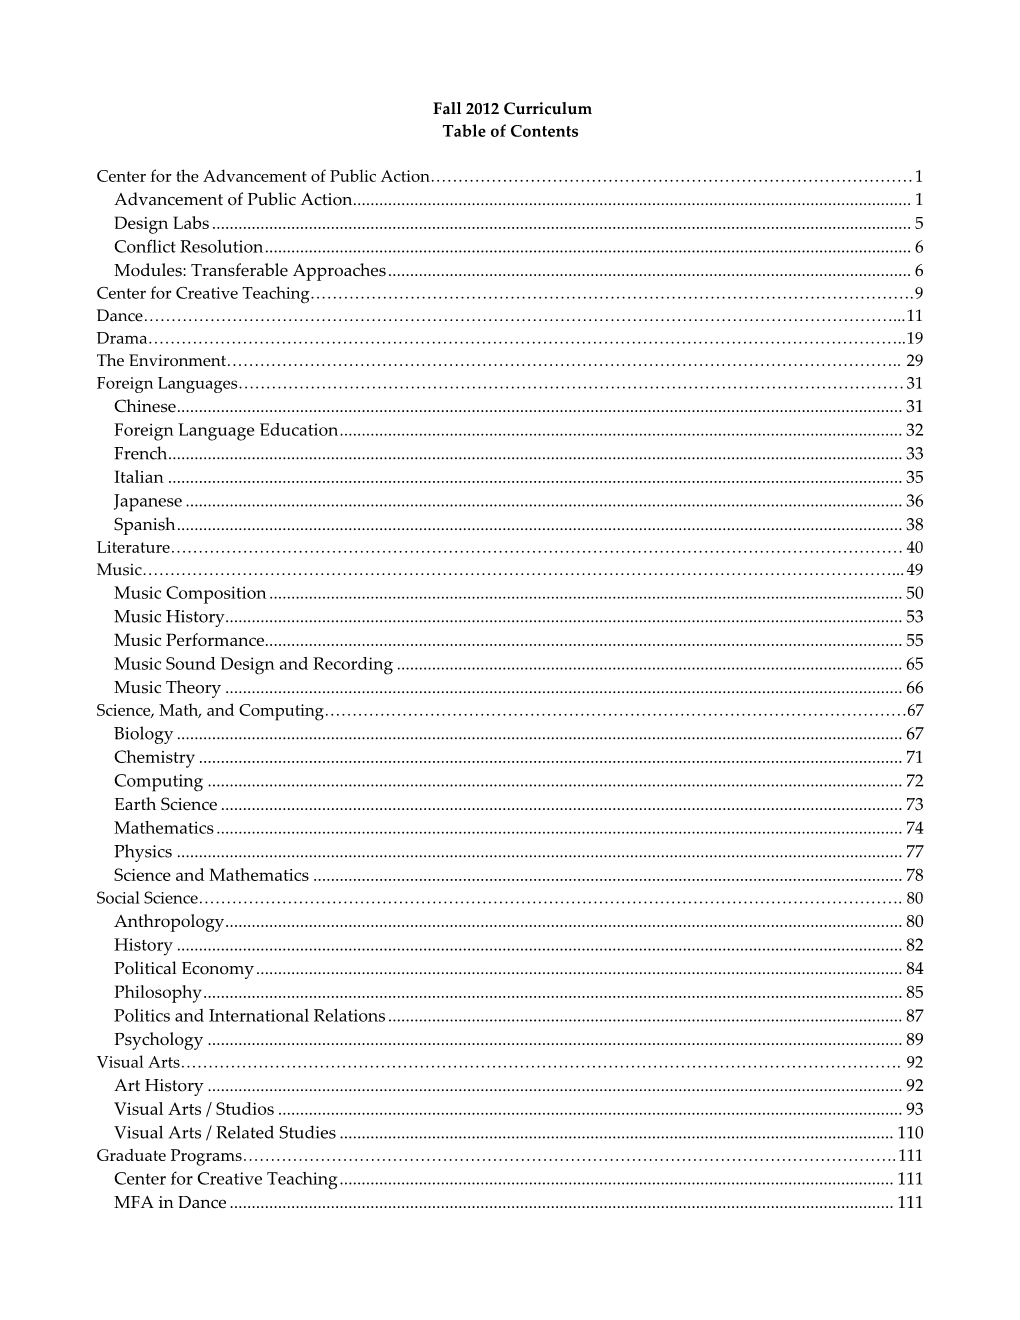 Fall 2012 Curriculum Table of Contents